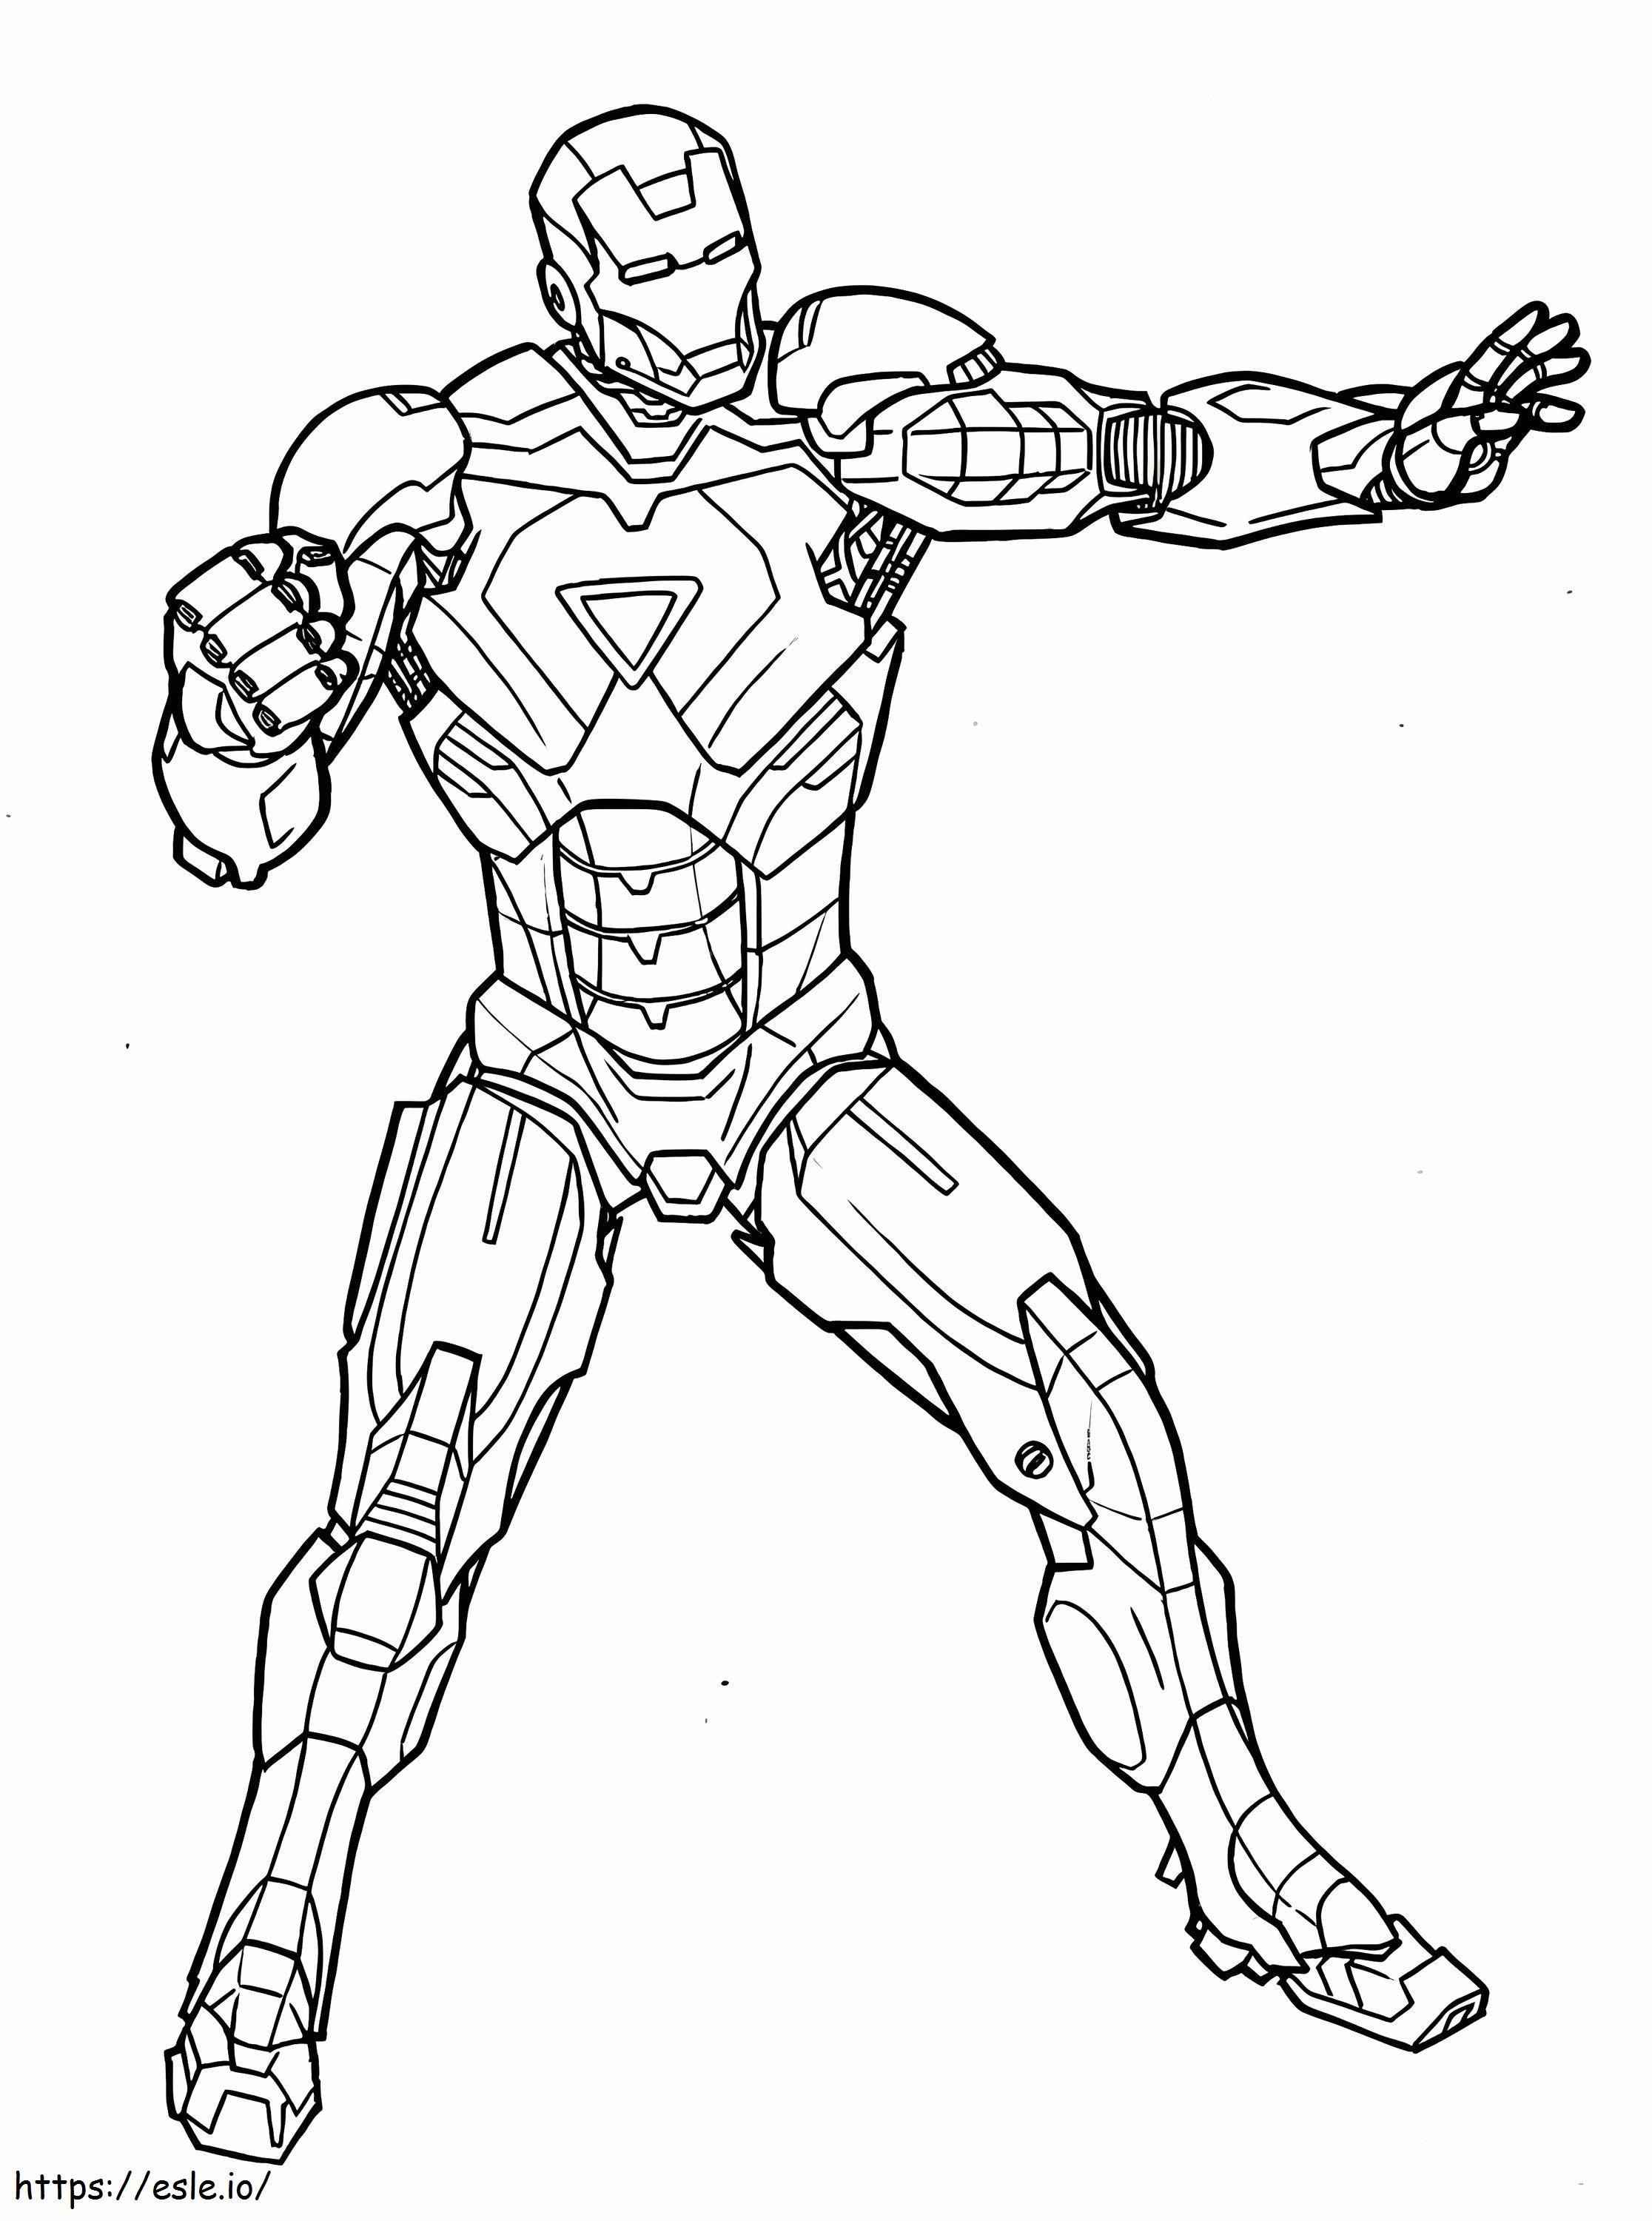 Cool Iron Man coloring page